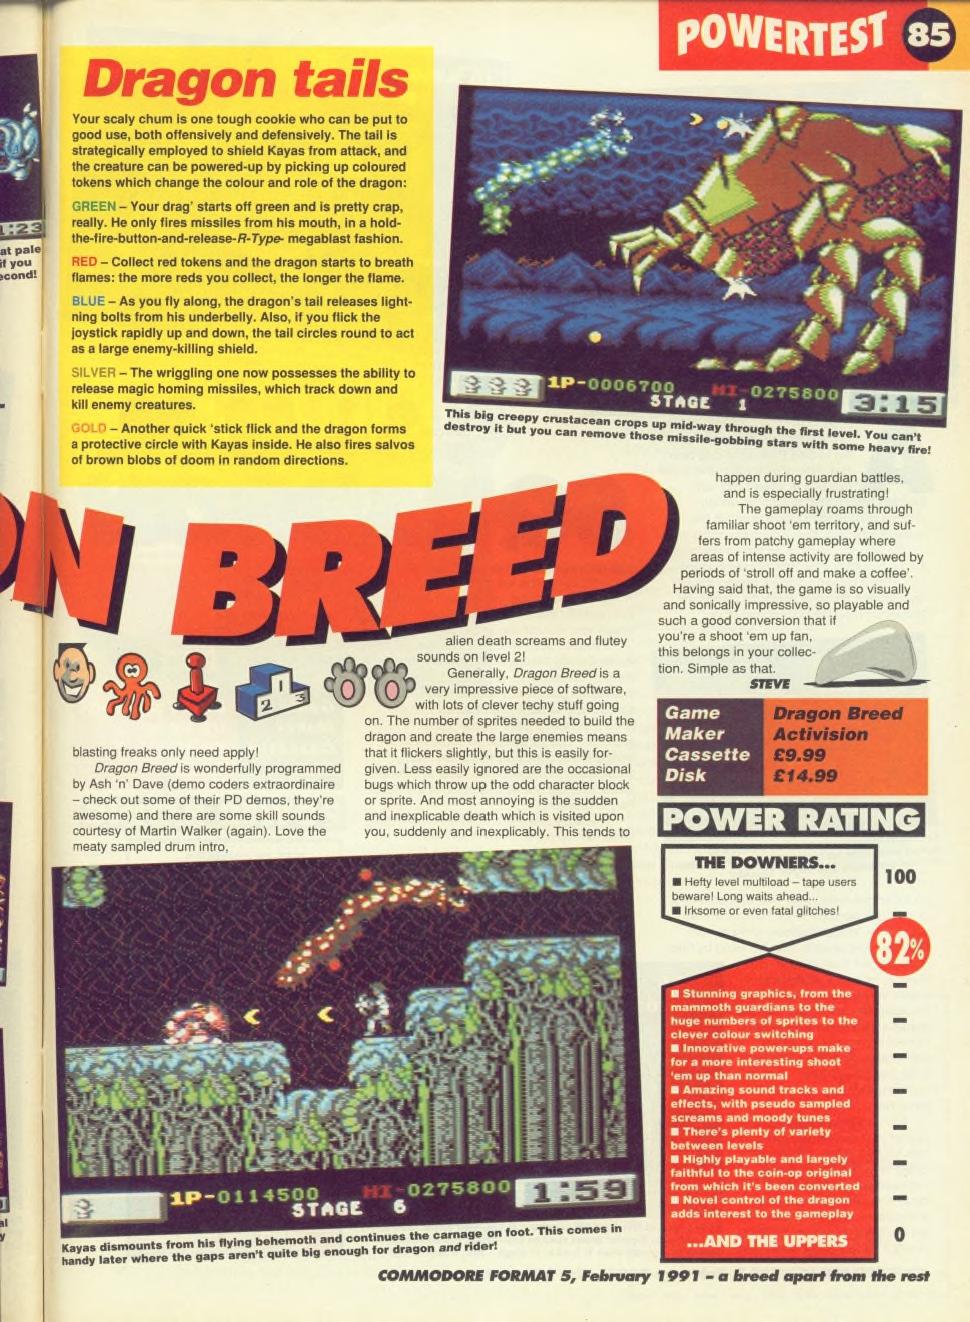 Commodore Format issue 5 page 85